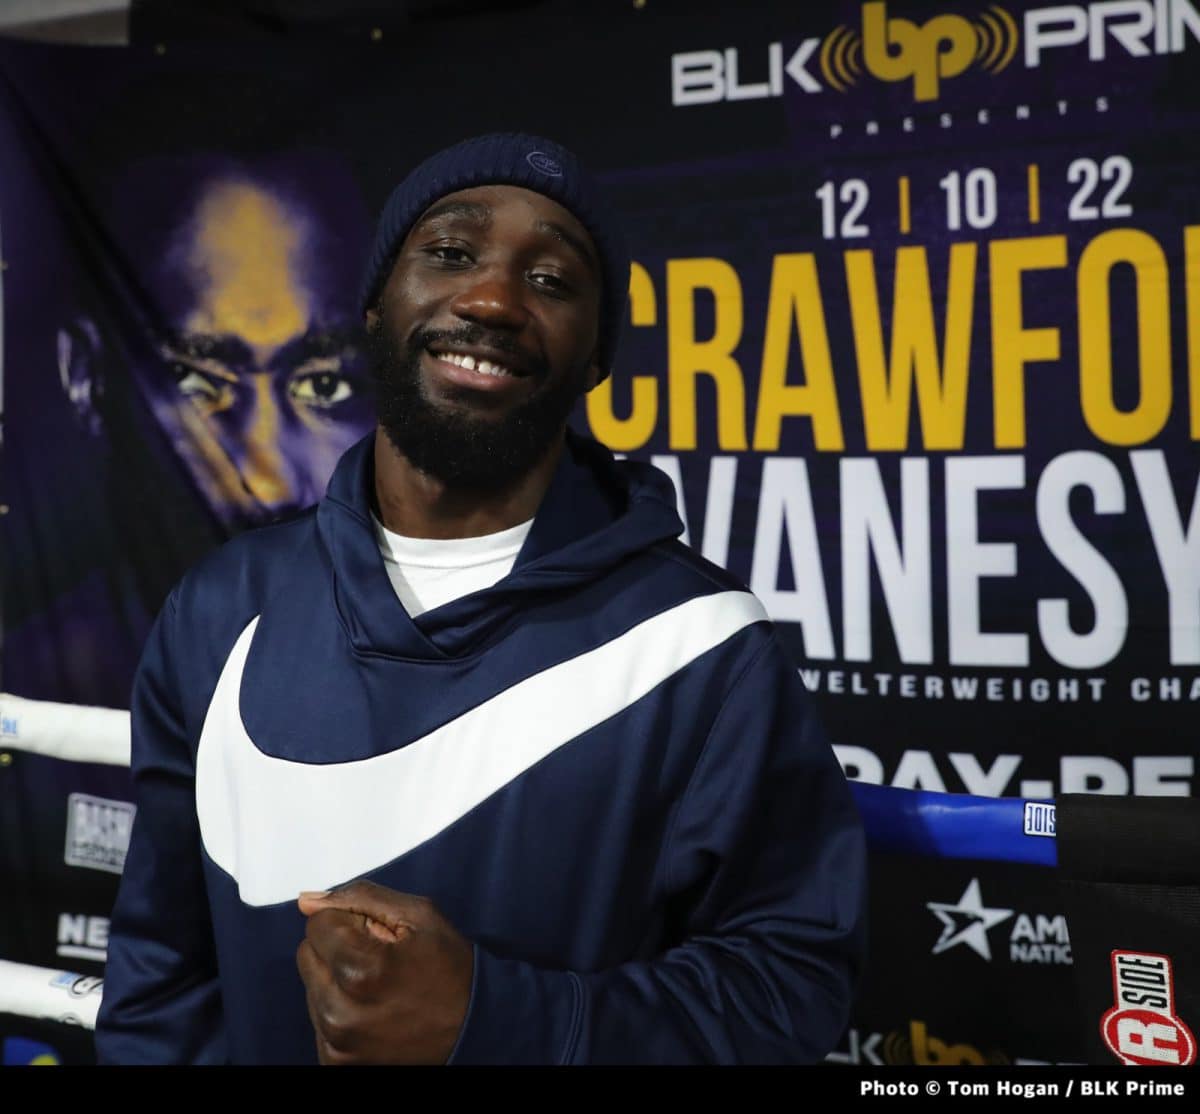 Image: Jermell Charlo will get stepped on says Terence Crawford